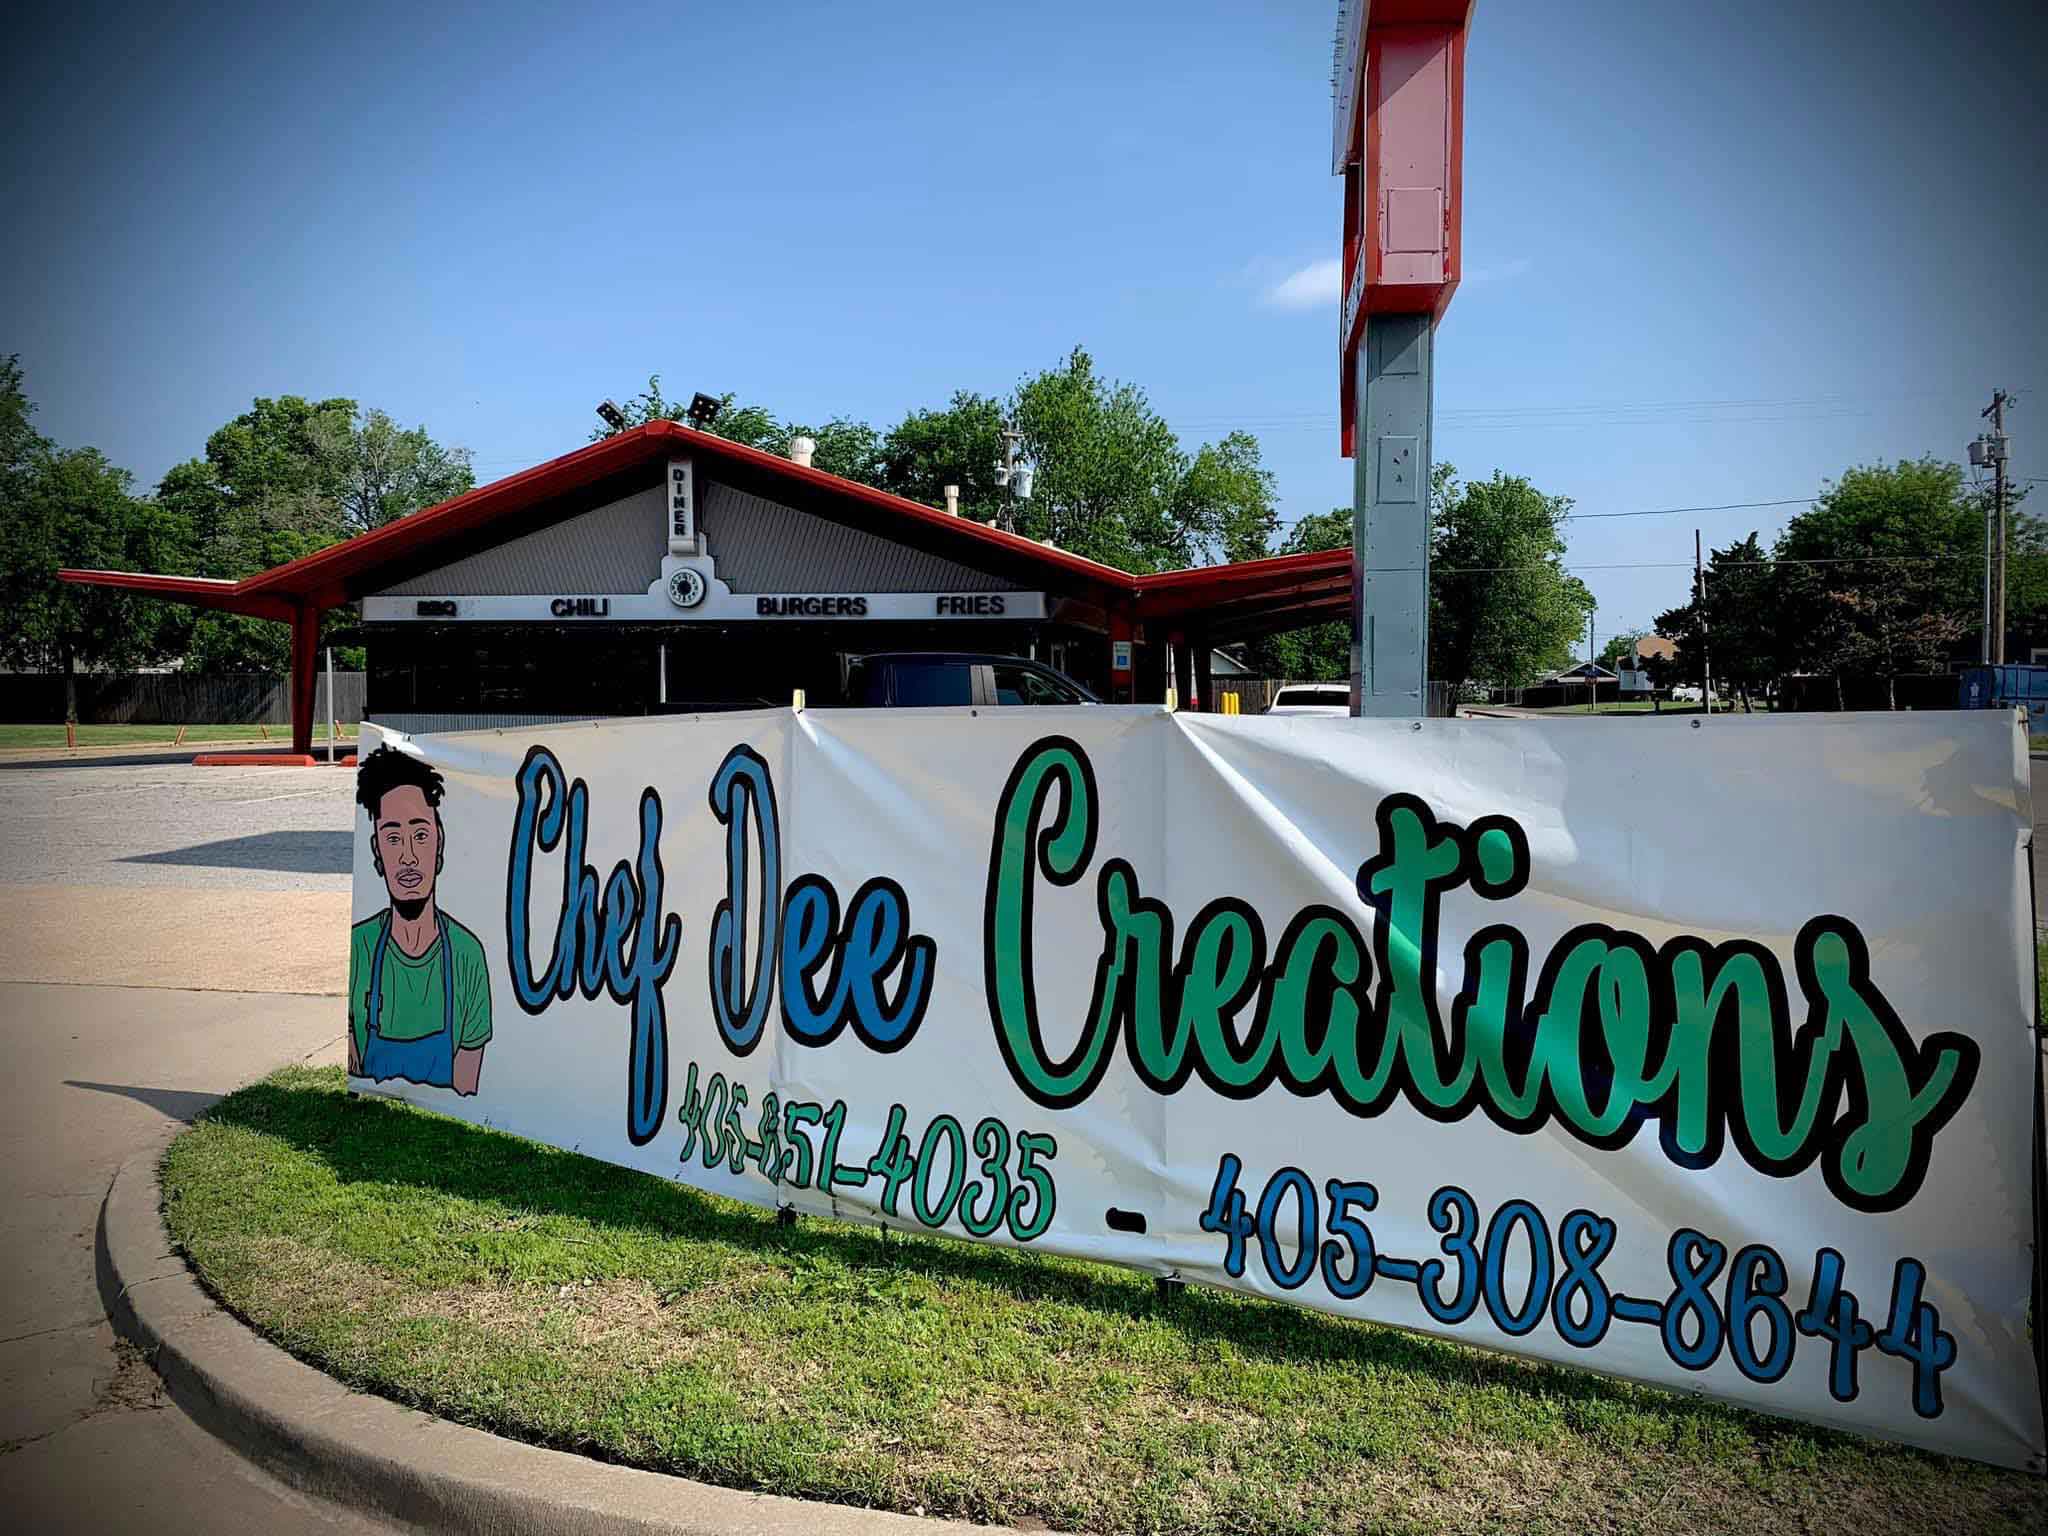 Chef Dee's Creations location in Moore, Oklahoma